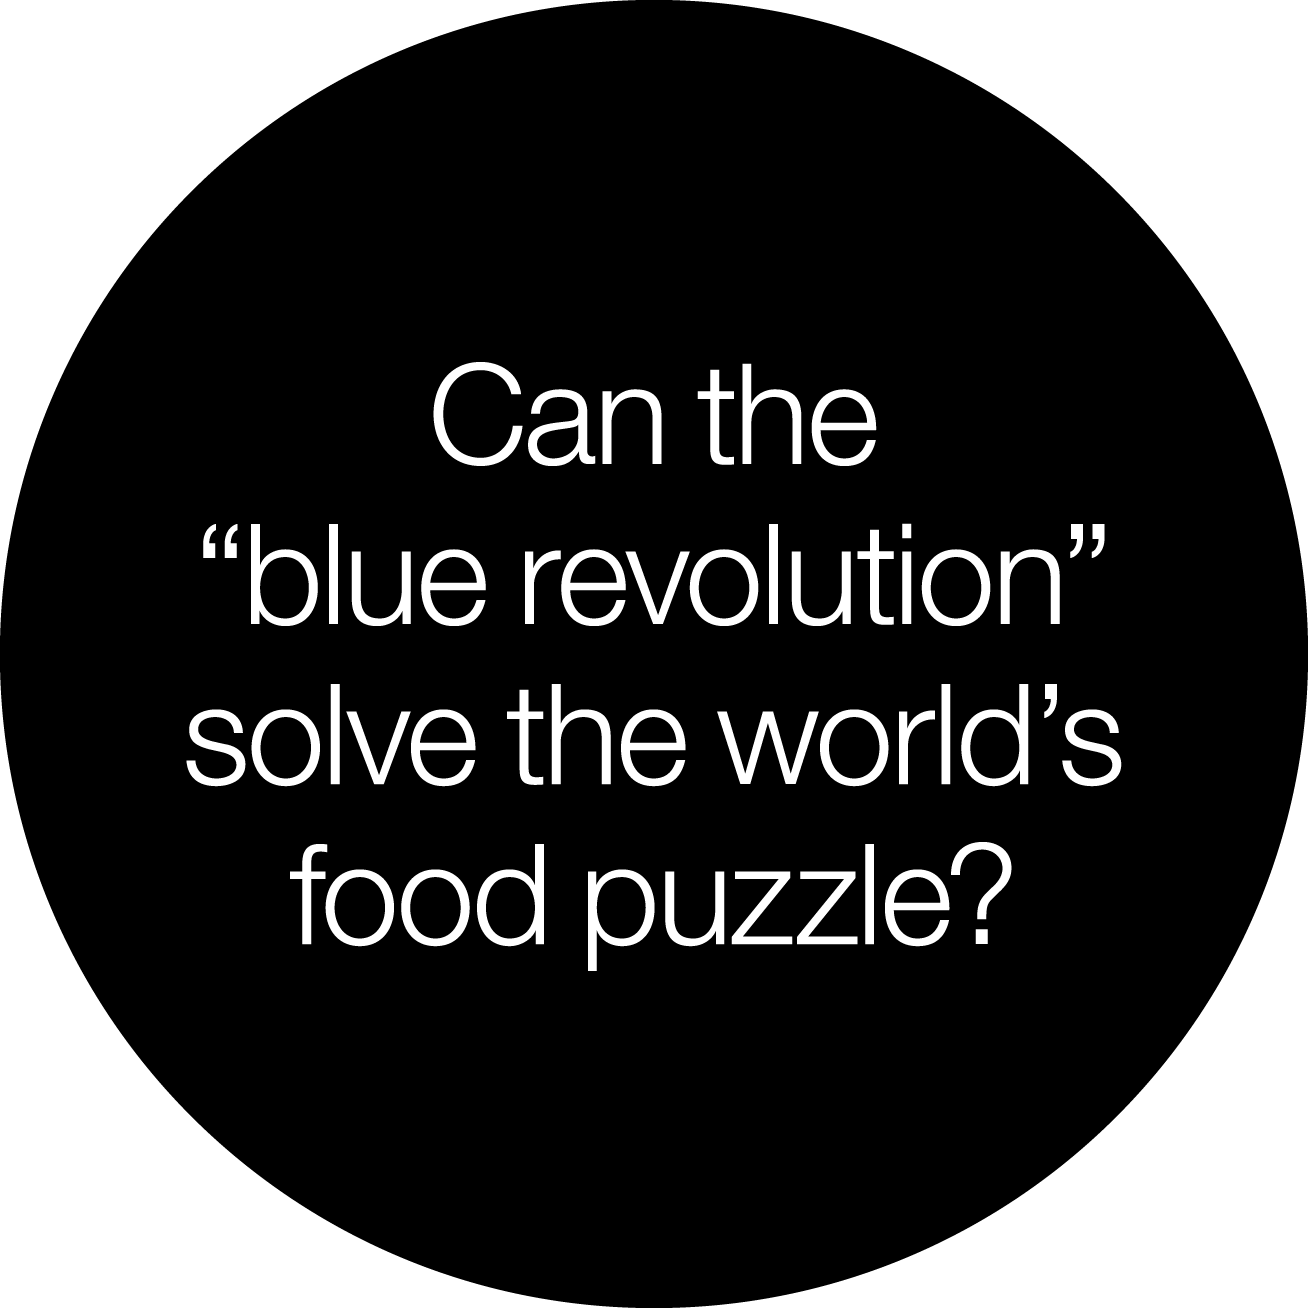 Can the blue revolution solve the world's food problem?